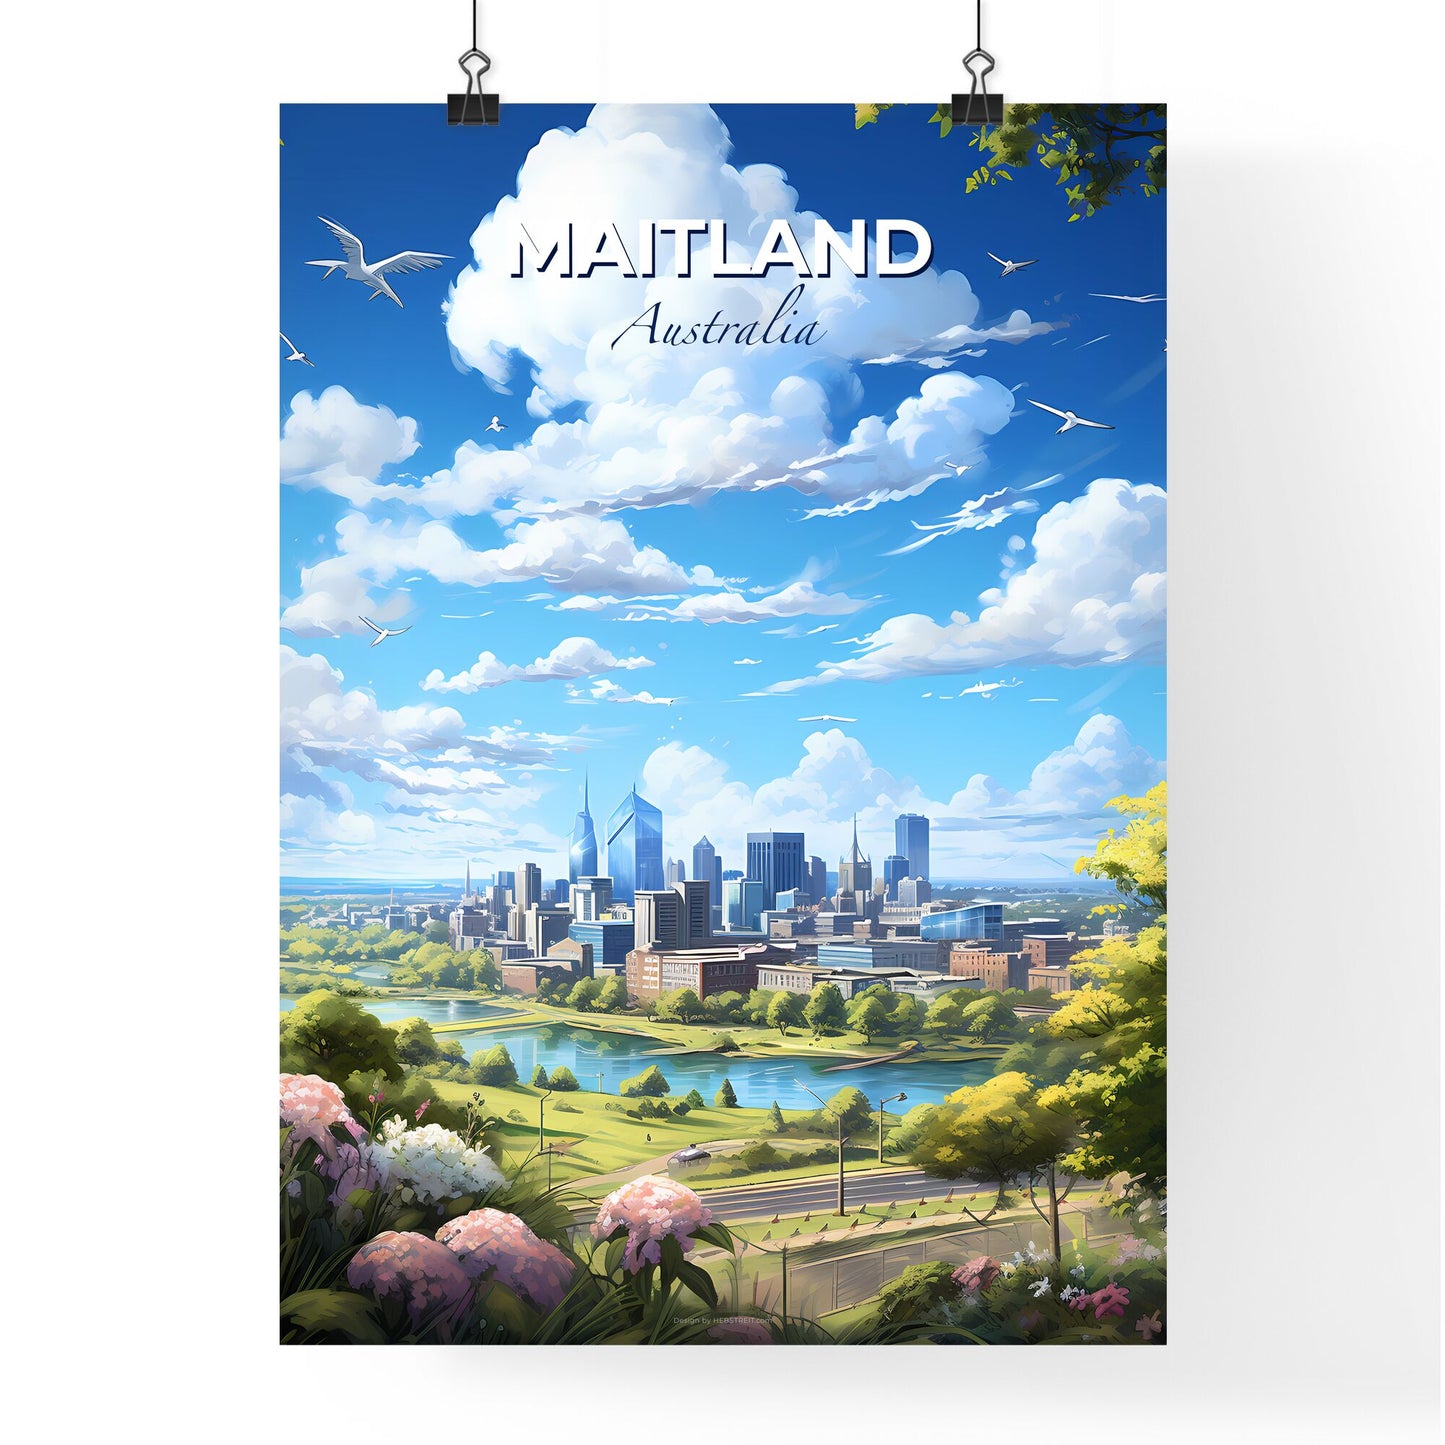 NewcastleMaitland Australia Skyline - A Landscape Of A City With A River And Birds Flying In The Sky - Customizable Travel Gift Default Title